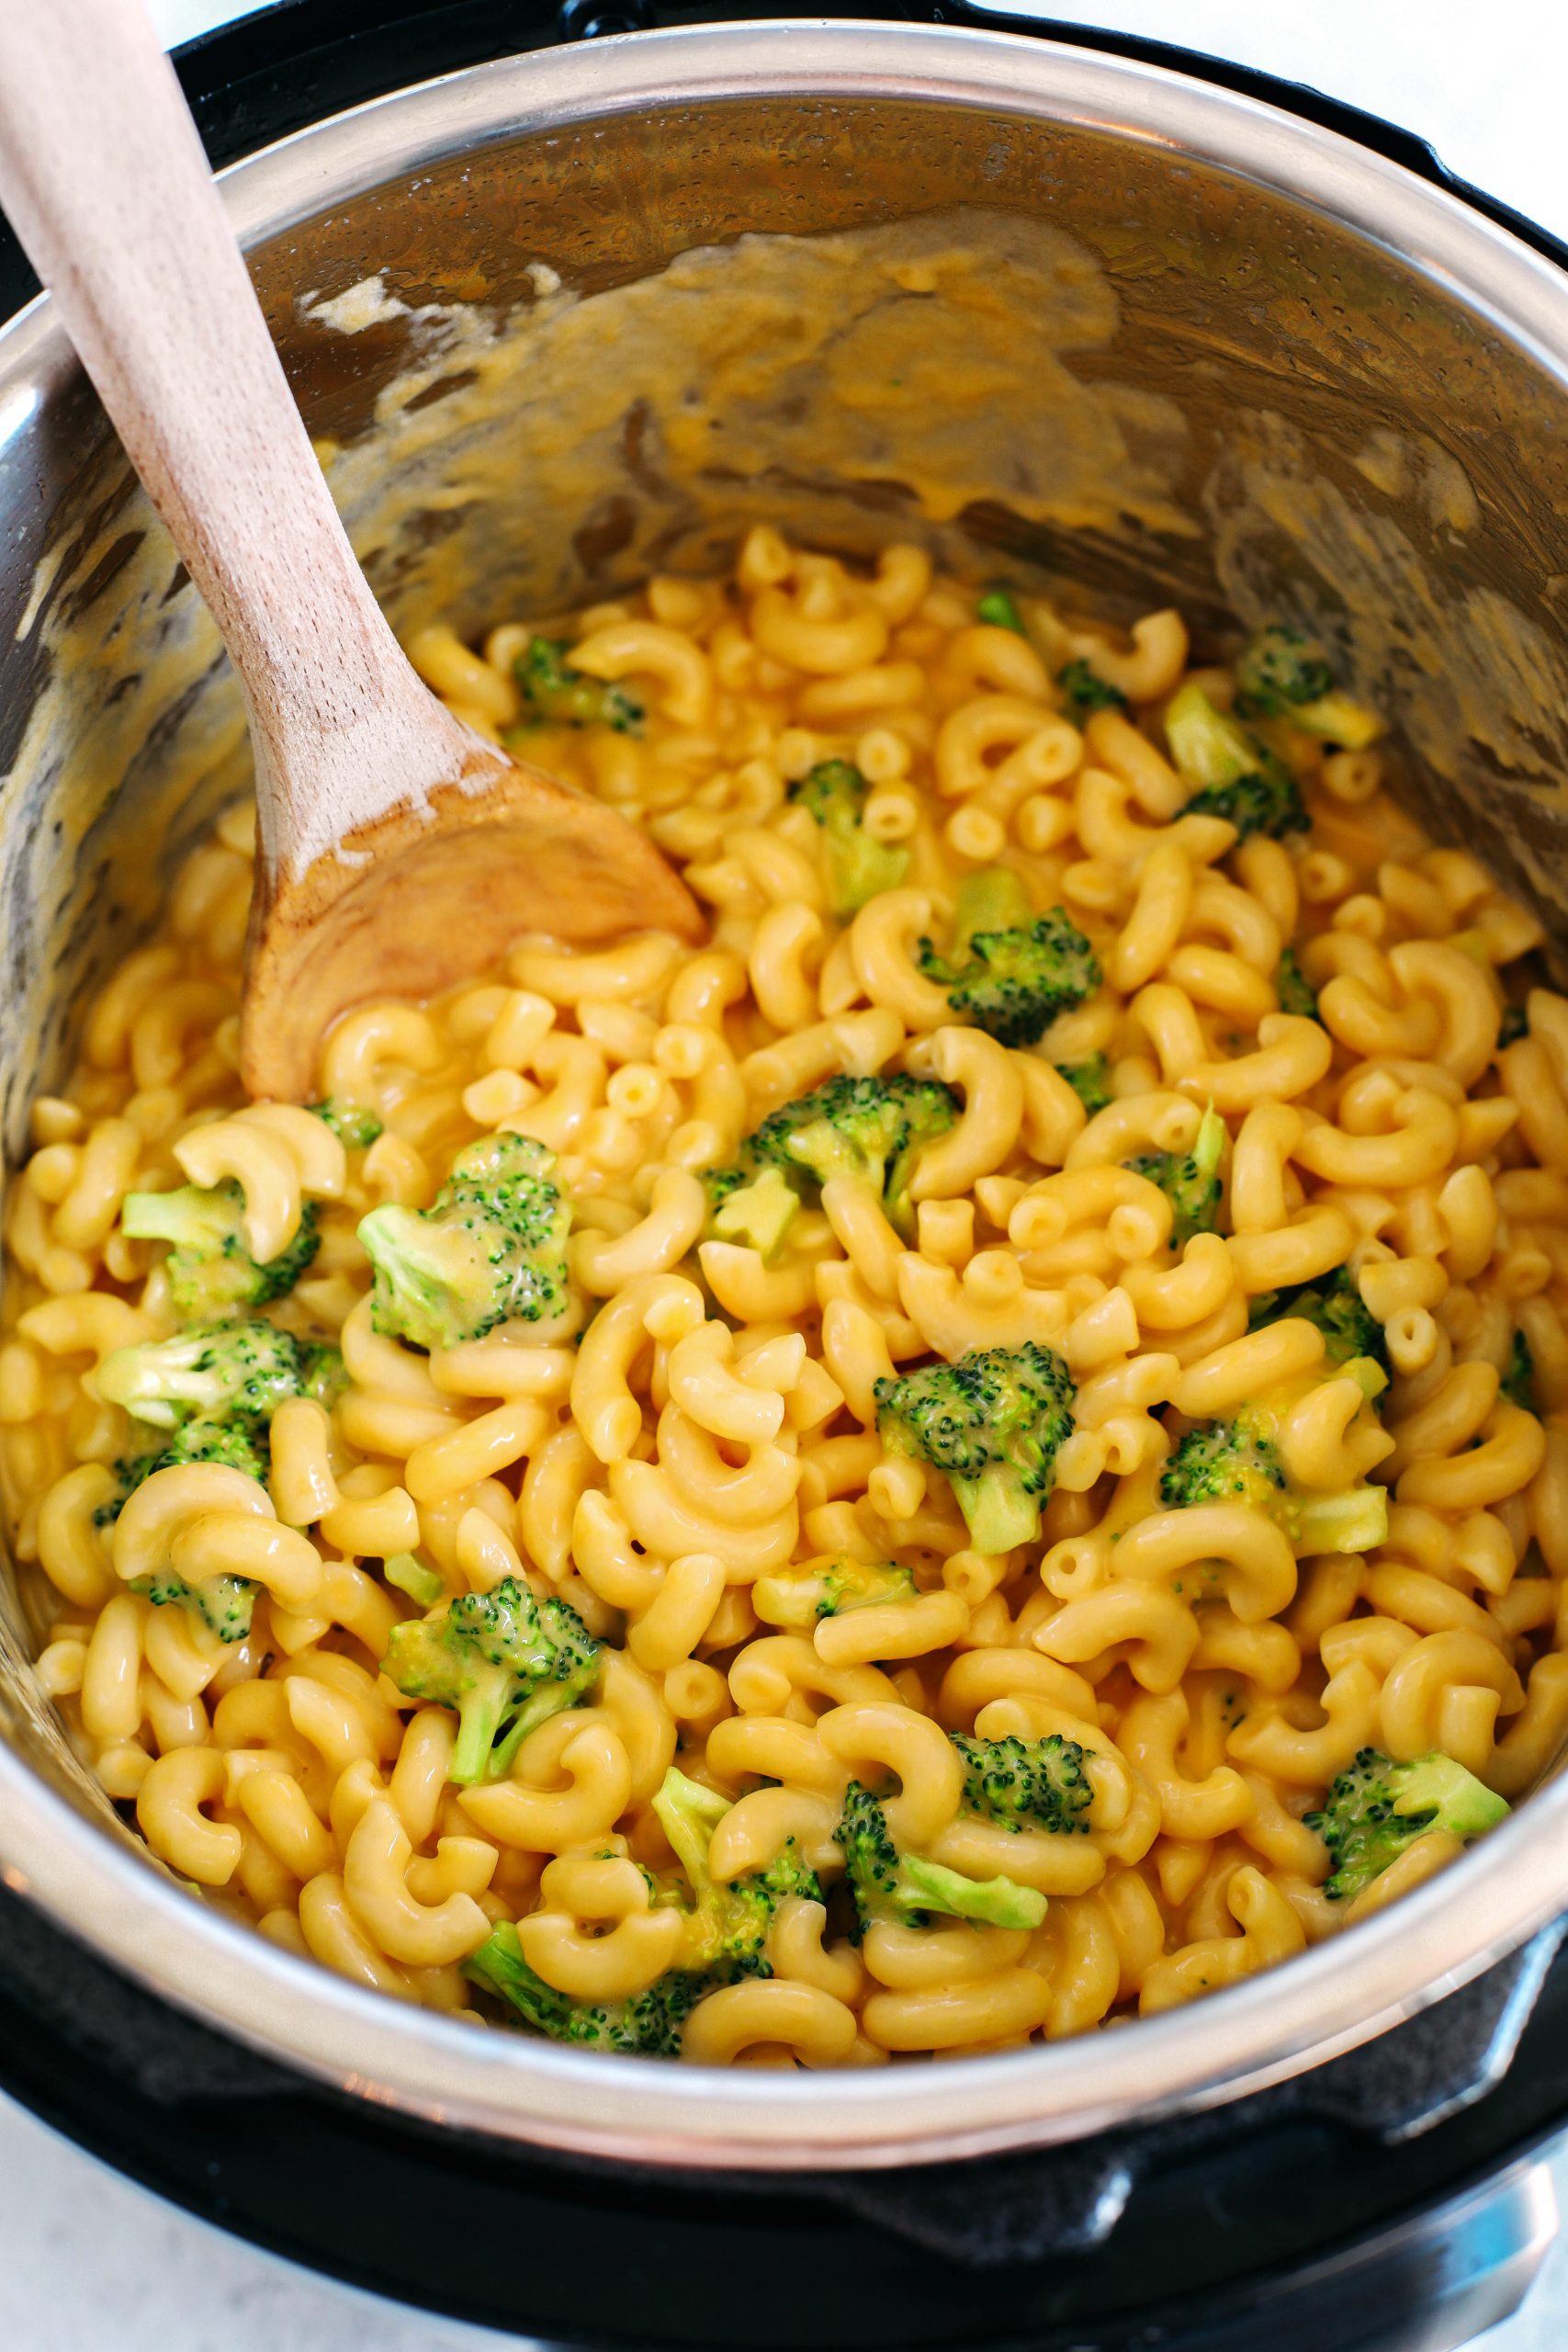 Creamy and delicious Instant Pot Mac & Cheese with Broccoli easily made in under 10 minutes for the perfect comfort food meal your whole family will love!